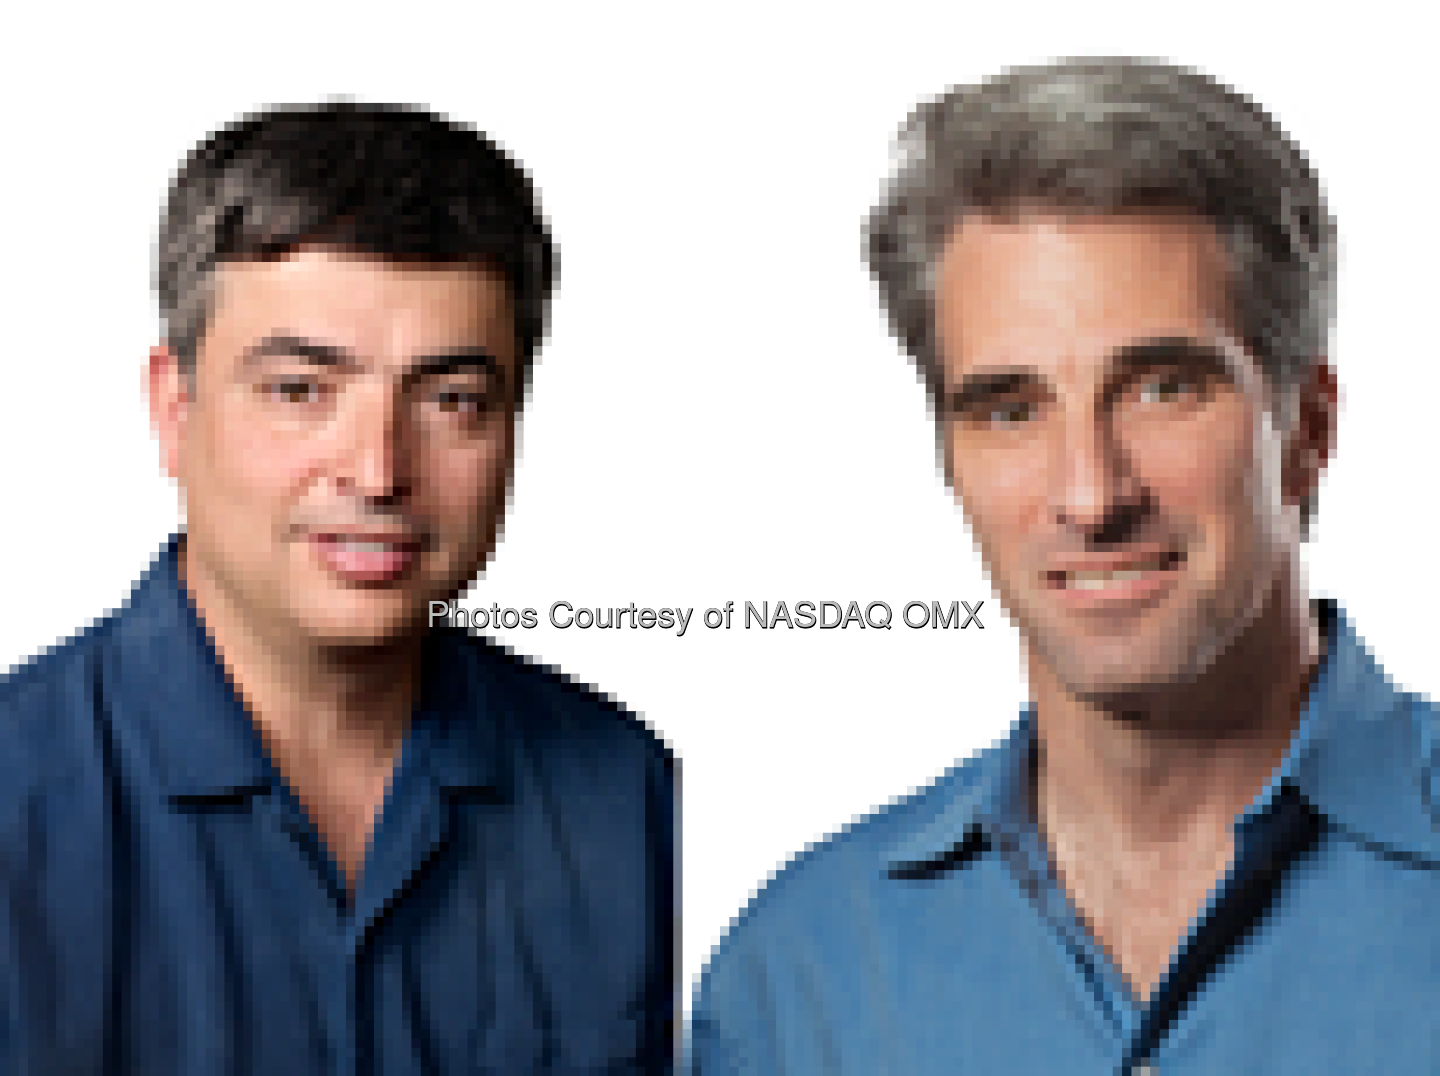 Code Conference Second Night Will Star @Apple Top Execs Eddy Cue and Craig Federighi http://on.recode.net/1rda9t6 #CodeCon The longtime Apple veterans and key decision makers at the company have contributed a lot to its success. Source: http://facebook.com/NASDAQ